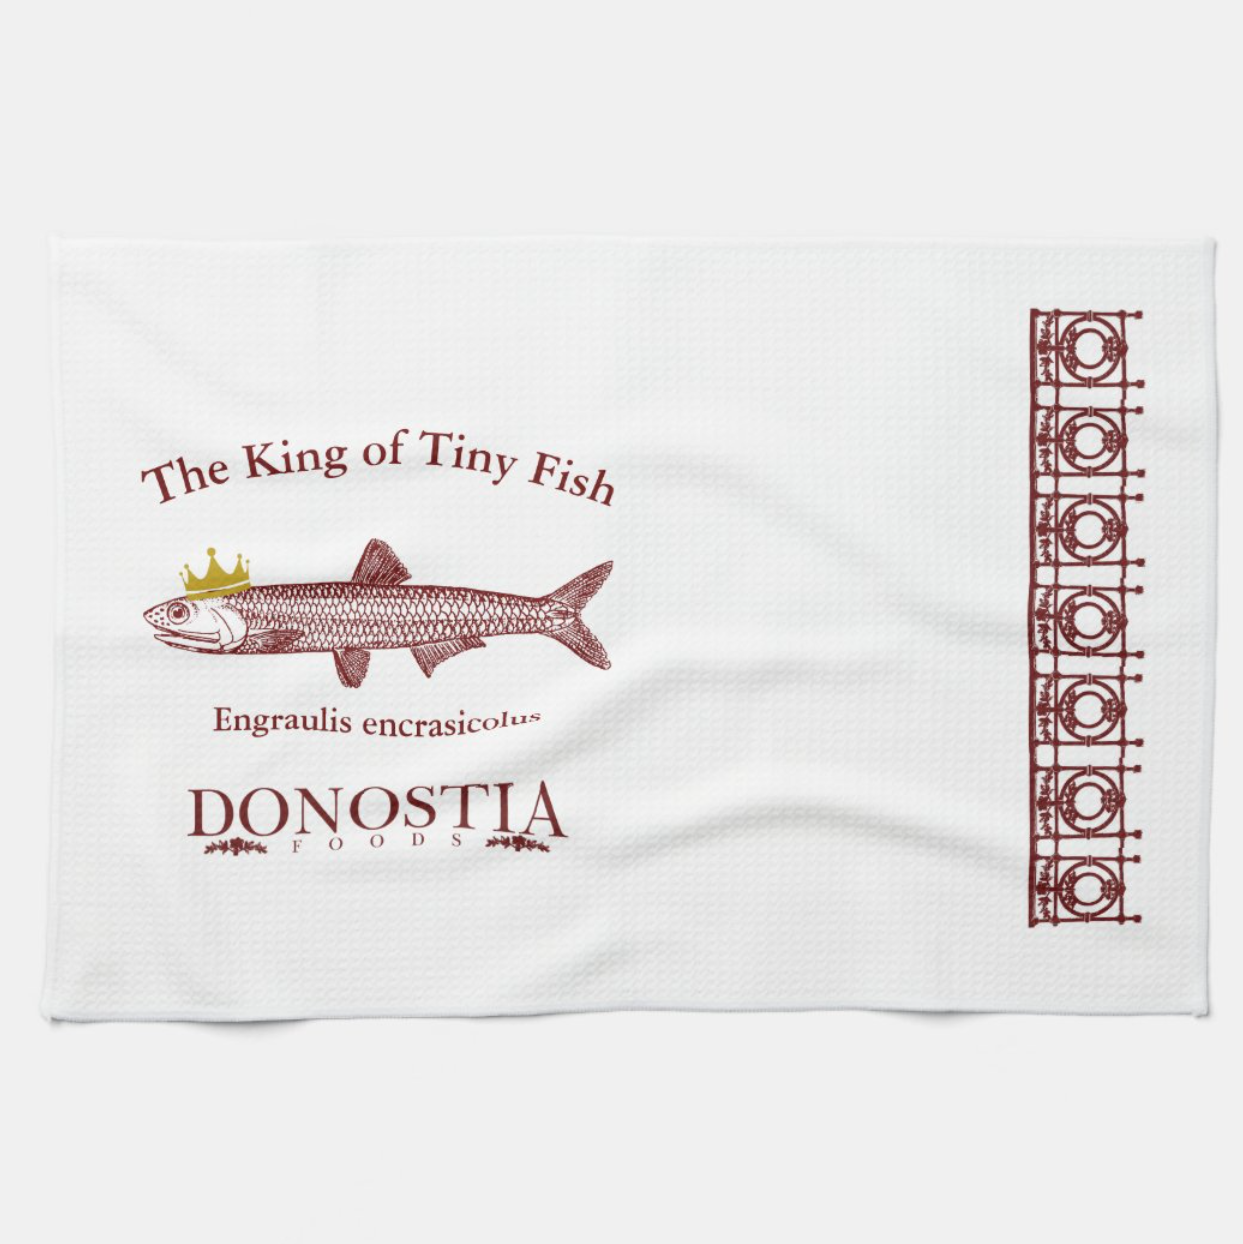 The King of Tiny Fish Kitchen Towel Full Towel View - Donostia Foods